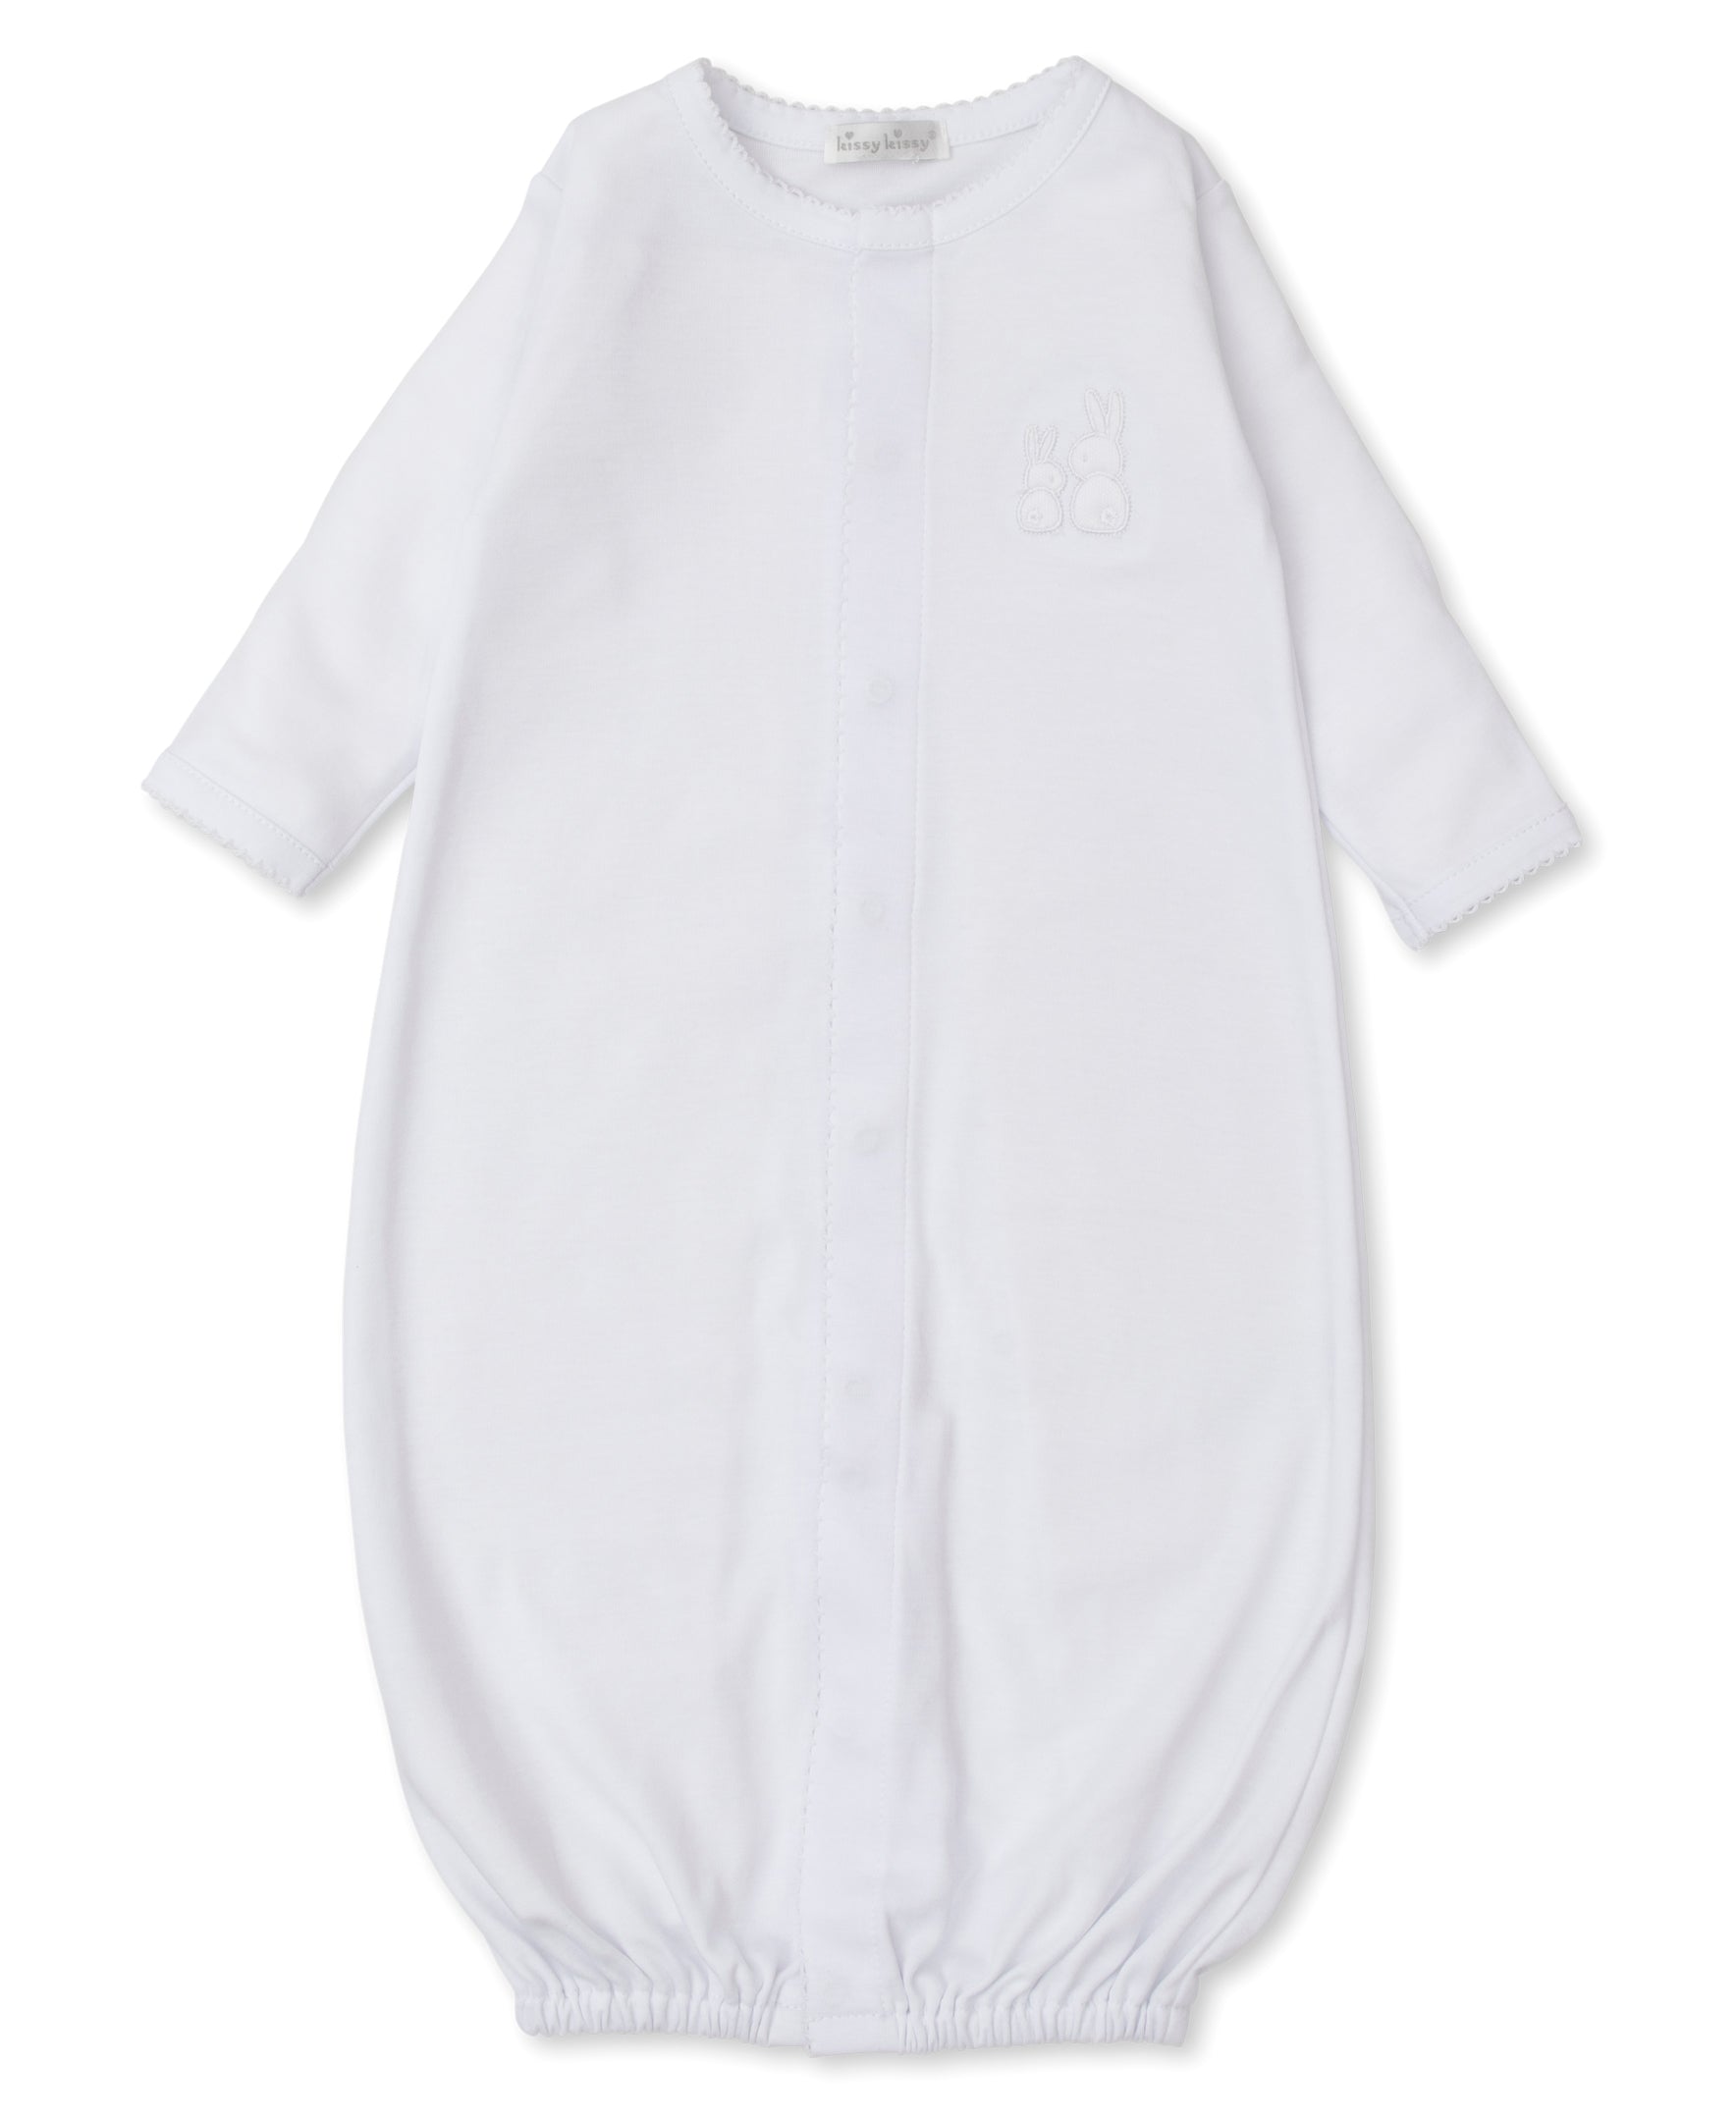 Pique Cuddle Bunnies White Convertible Gown - Kissy Kissy